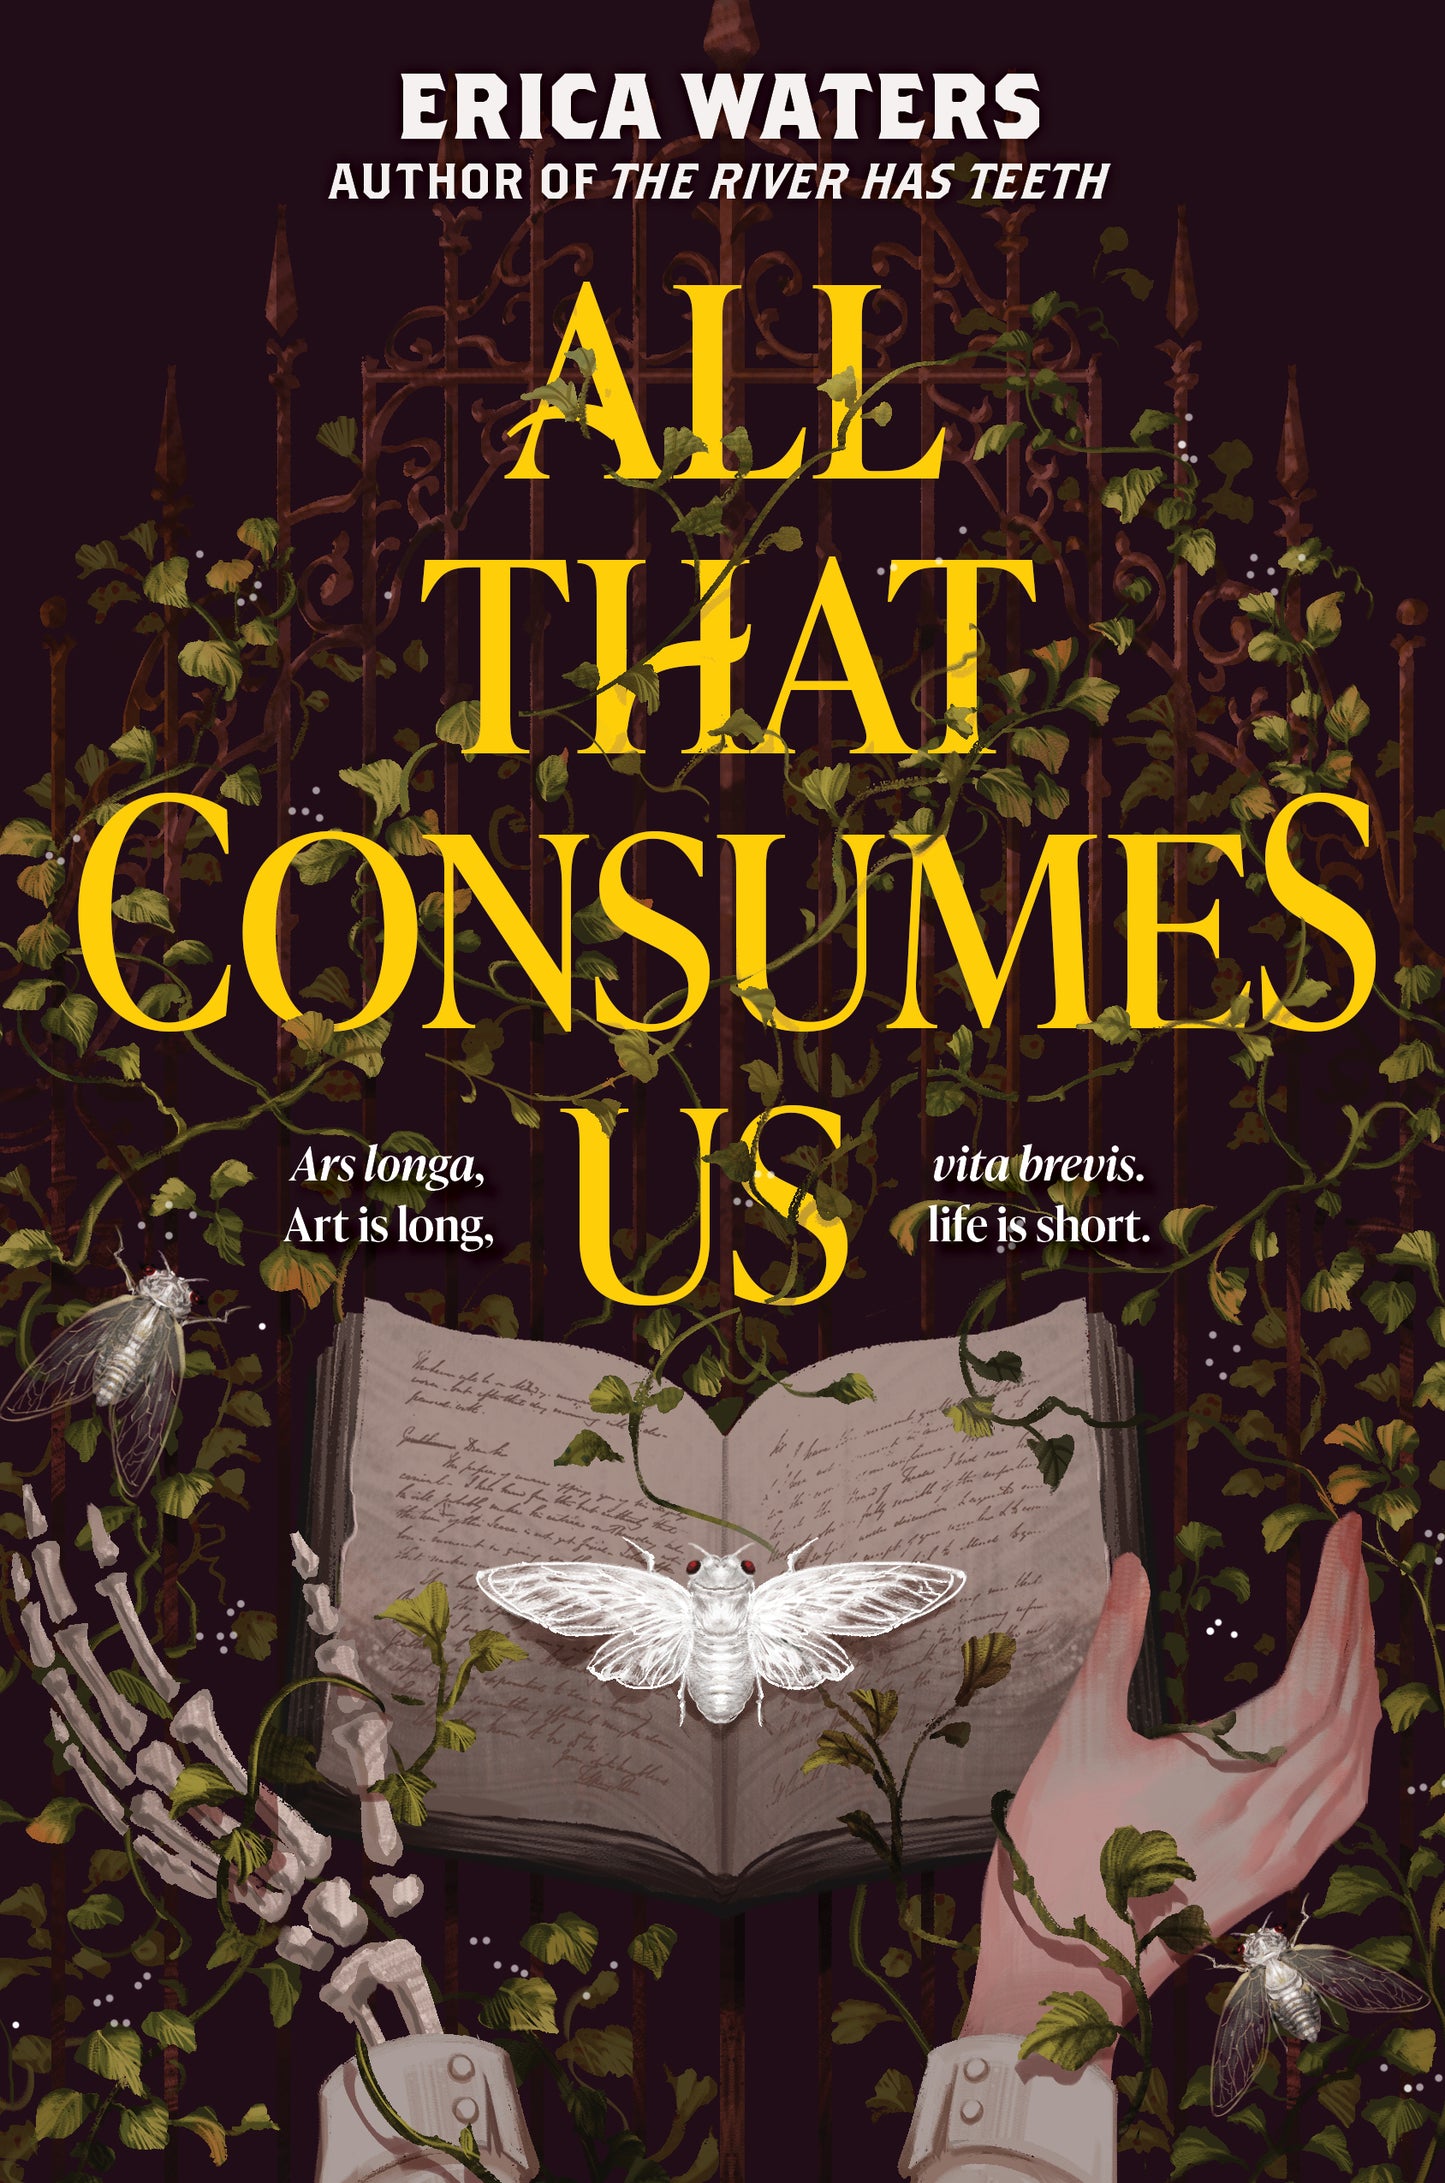 All That Consumes Us - Erica Waters *SIGNED BOOKPLATE*